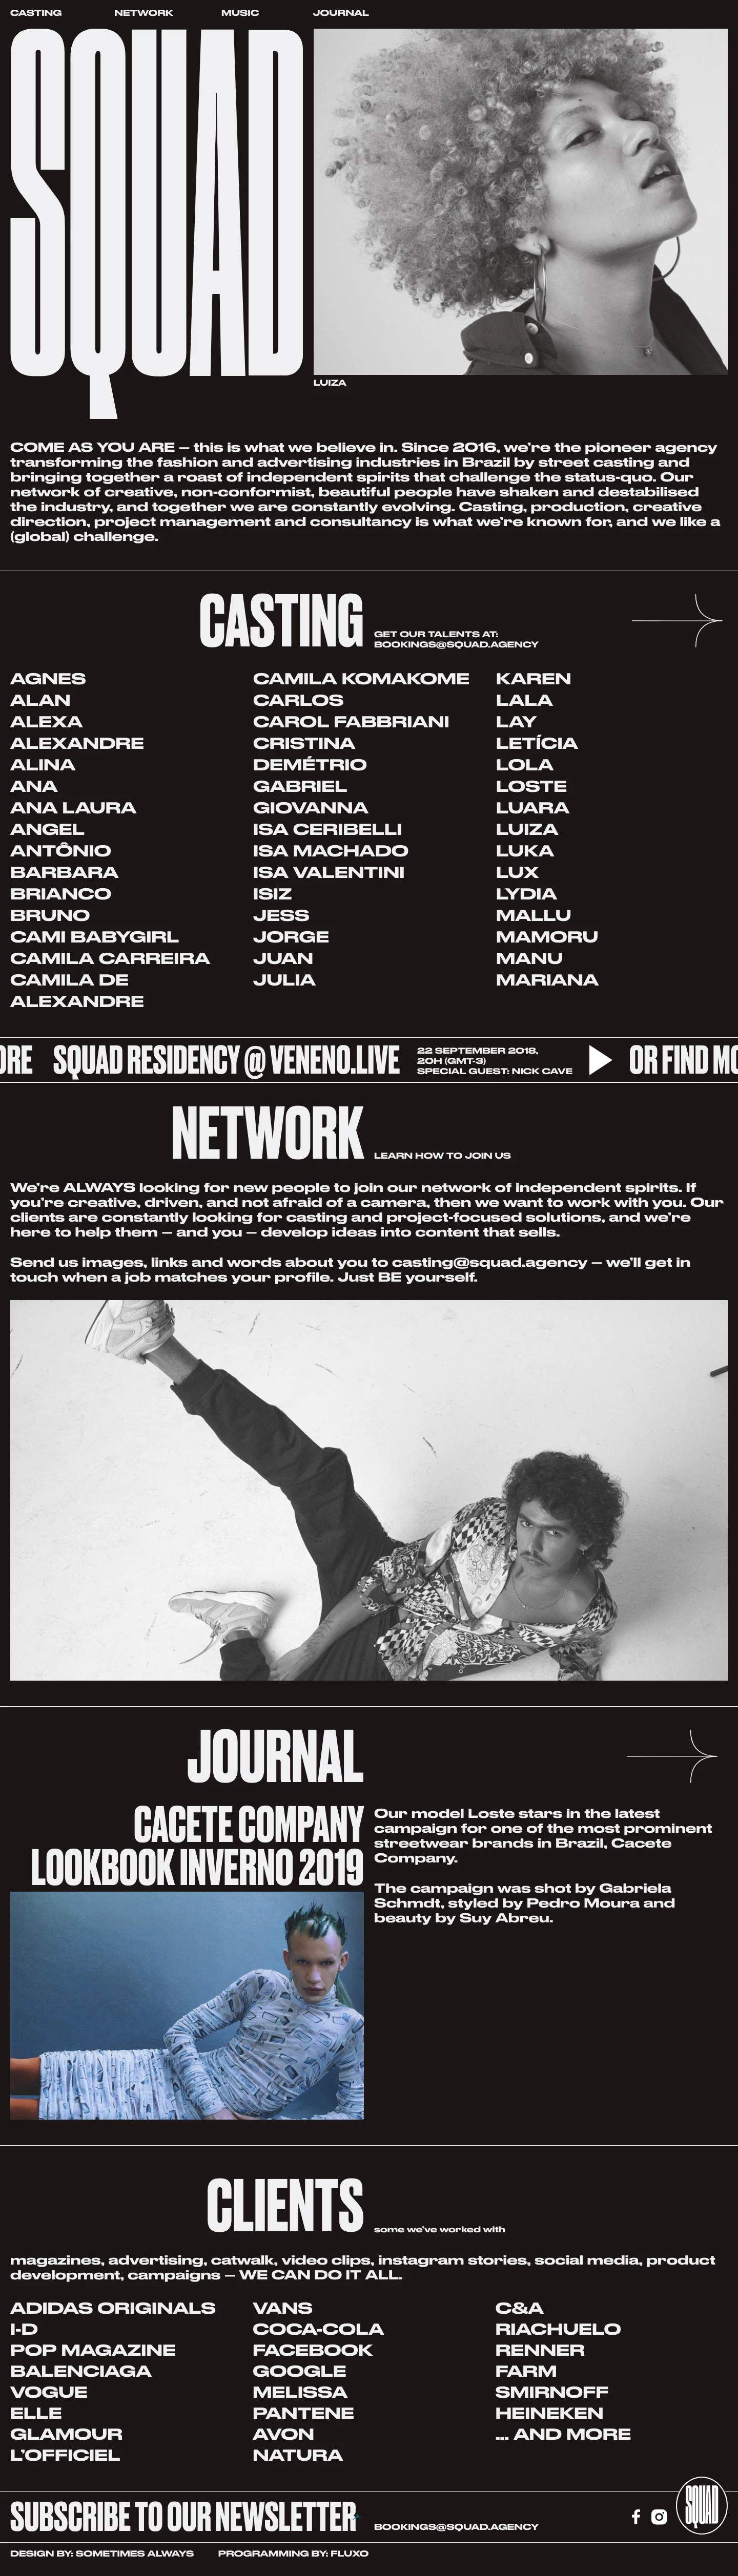 Squad Landing Page Example: COME AS YOU ARE – this is what we believe in. Since 2016, we’re the pioneer agency transforming the fashion and advertising industries in Brazil by street casting and bringing together a roast of independent spirits that challenge the status-quo. Our network of creative, non-conformist, beautiful people have shaken and destabilised the industry, and together we are constantly evolving. Casting, production, creative direction, project management and consultancy is what we’re known for, and we like a (global) challenge.